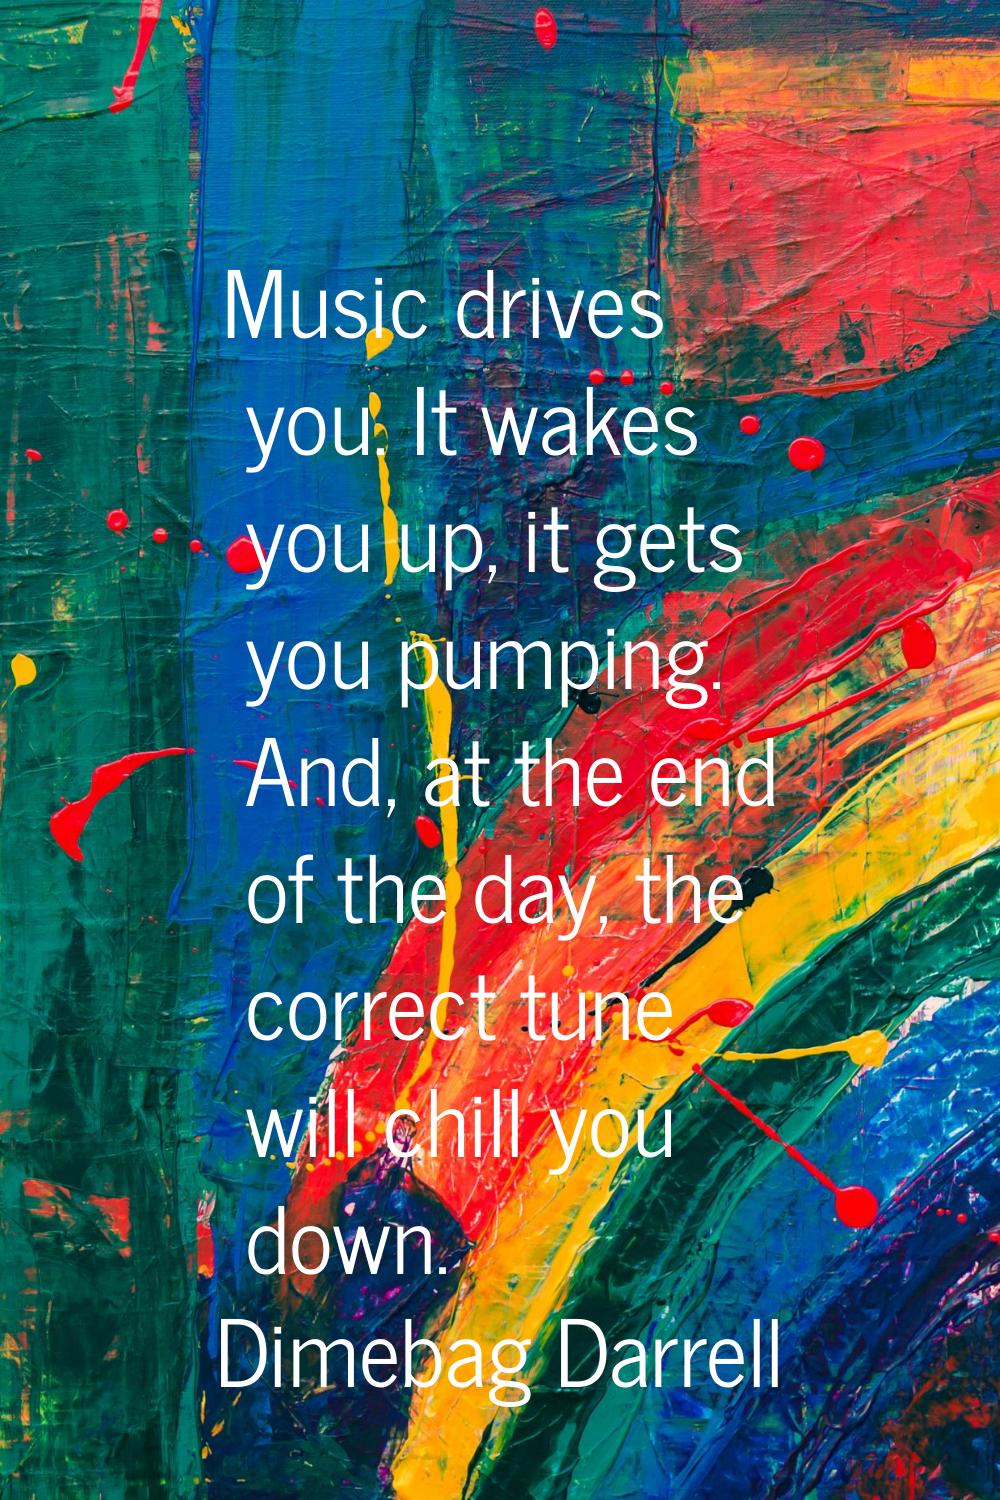 Music drives you. It wakes you up, it gets you pumping. And, at the end of the day, the correct tun